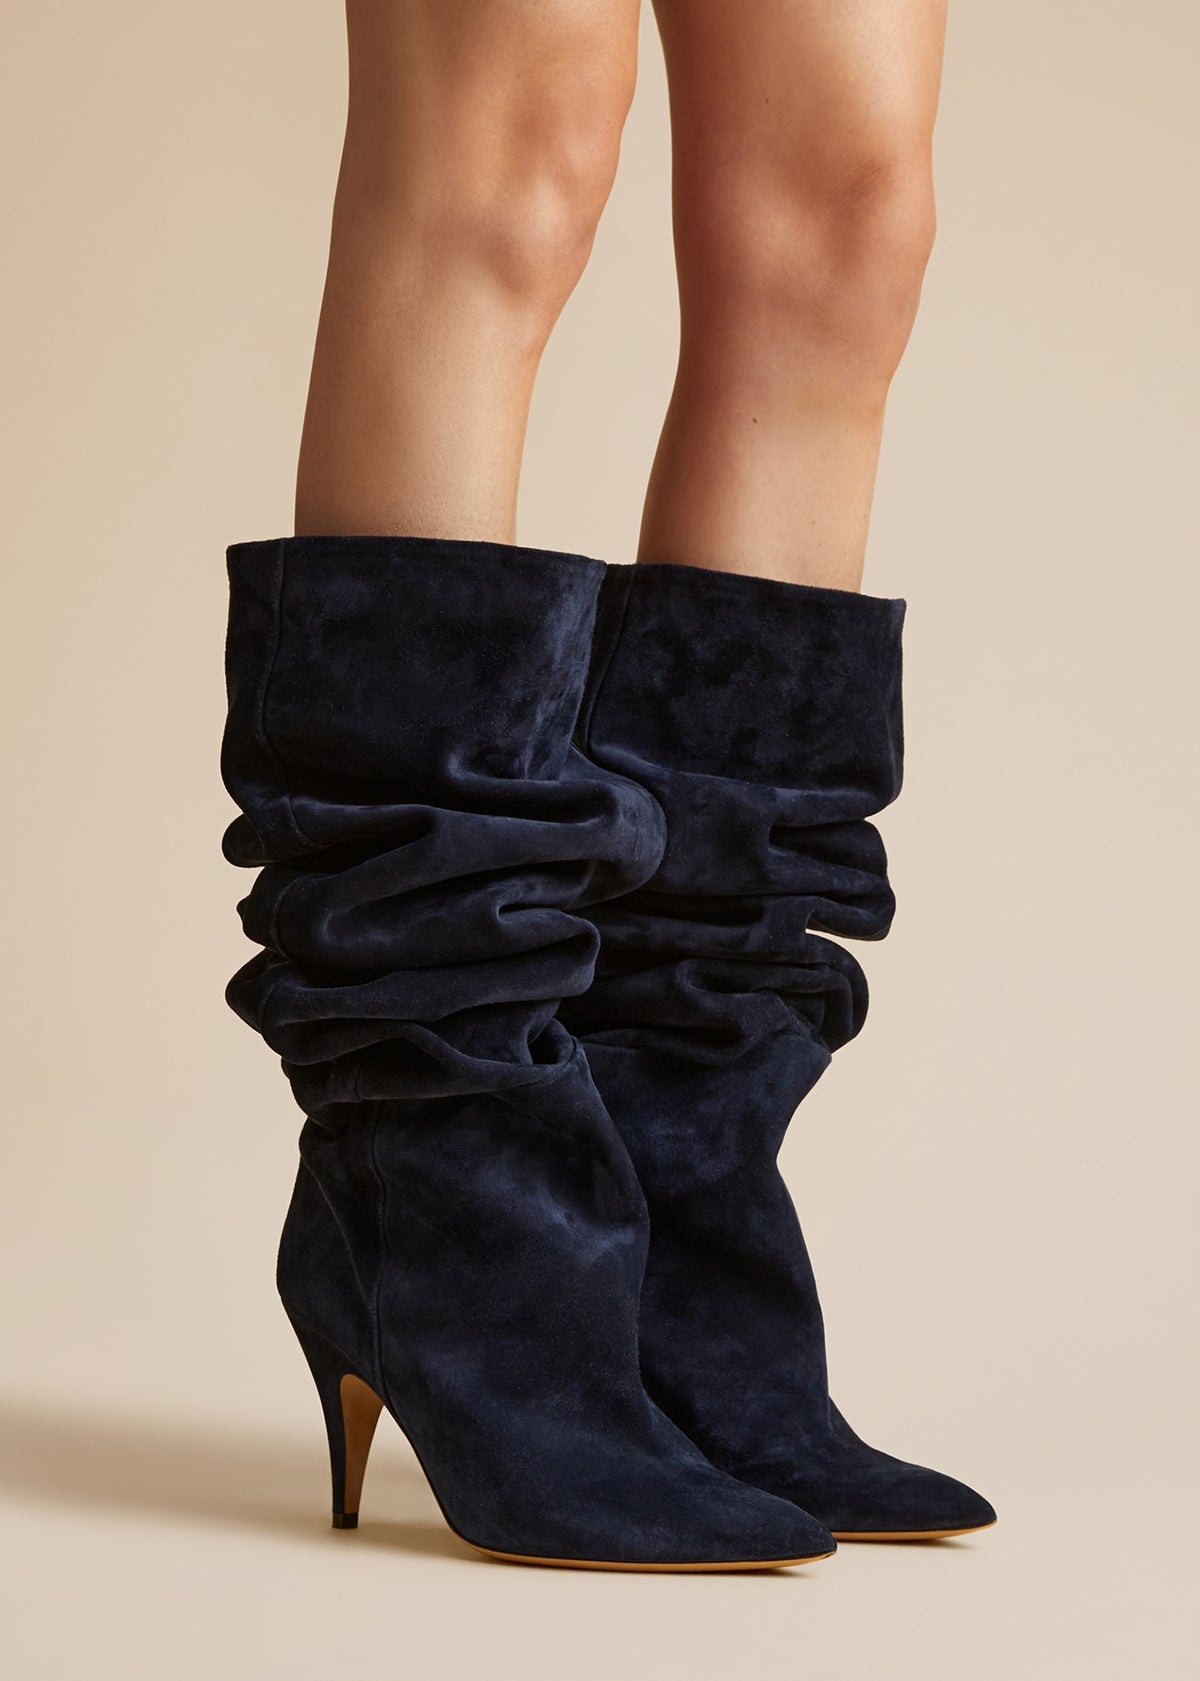 The River Knee-High Boot in Midnight Suede - 5